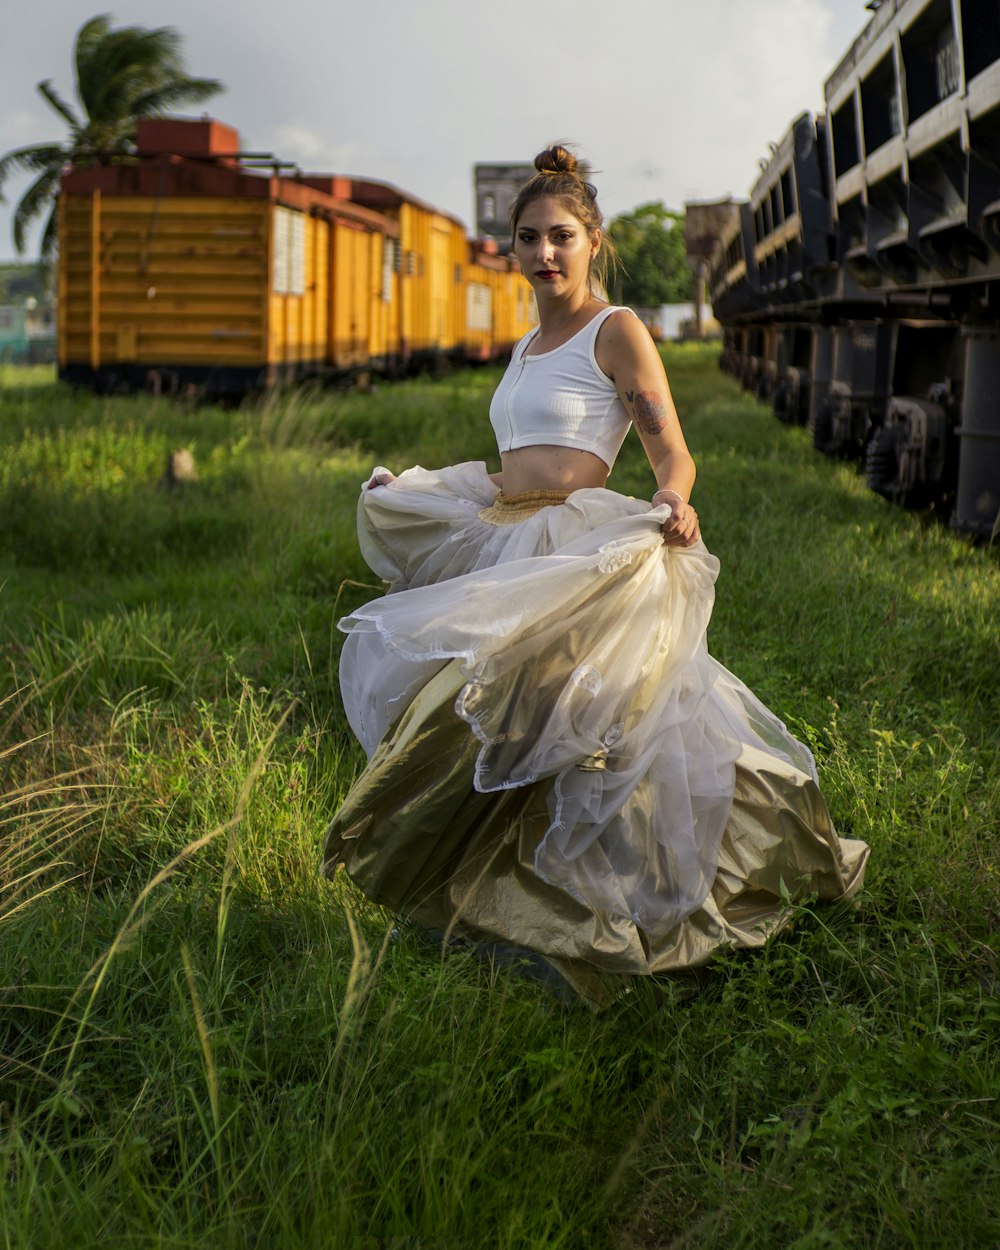 a person in a white dress sitting in a grassy field